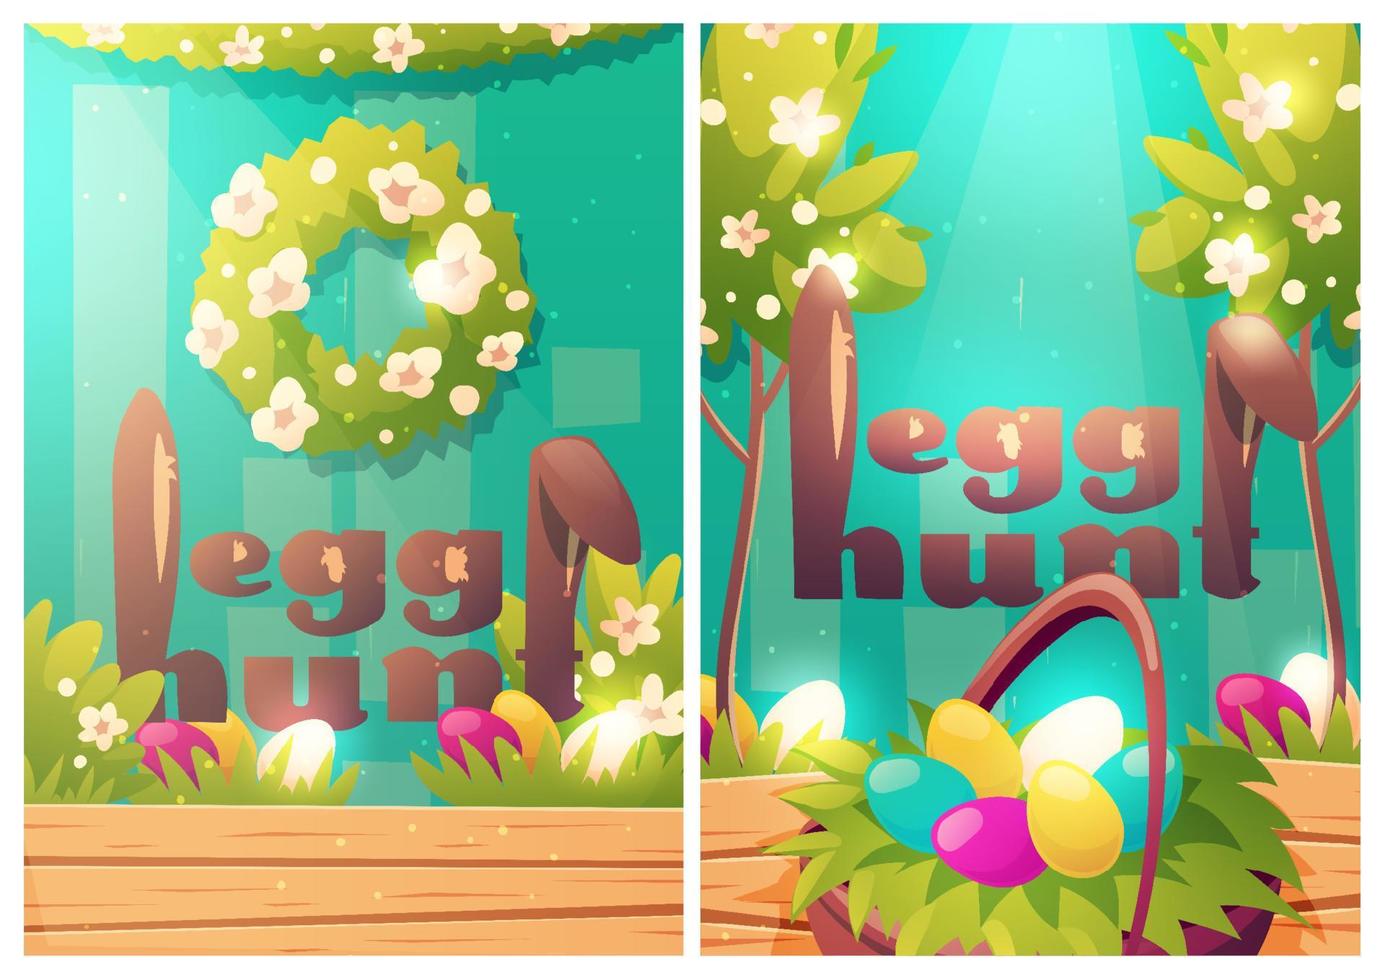 Easter egg hunt cartoon posters with rabbit ears vector